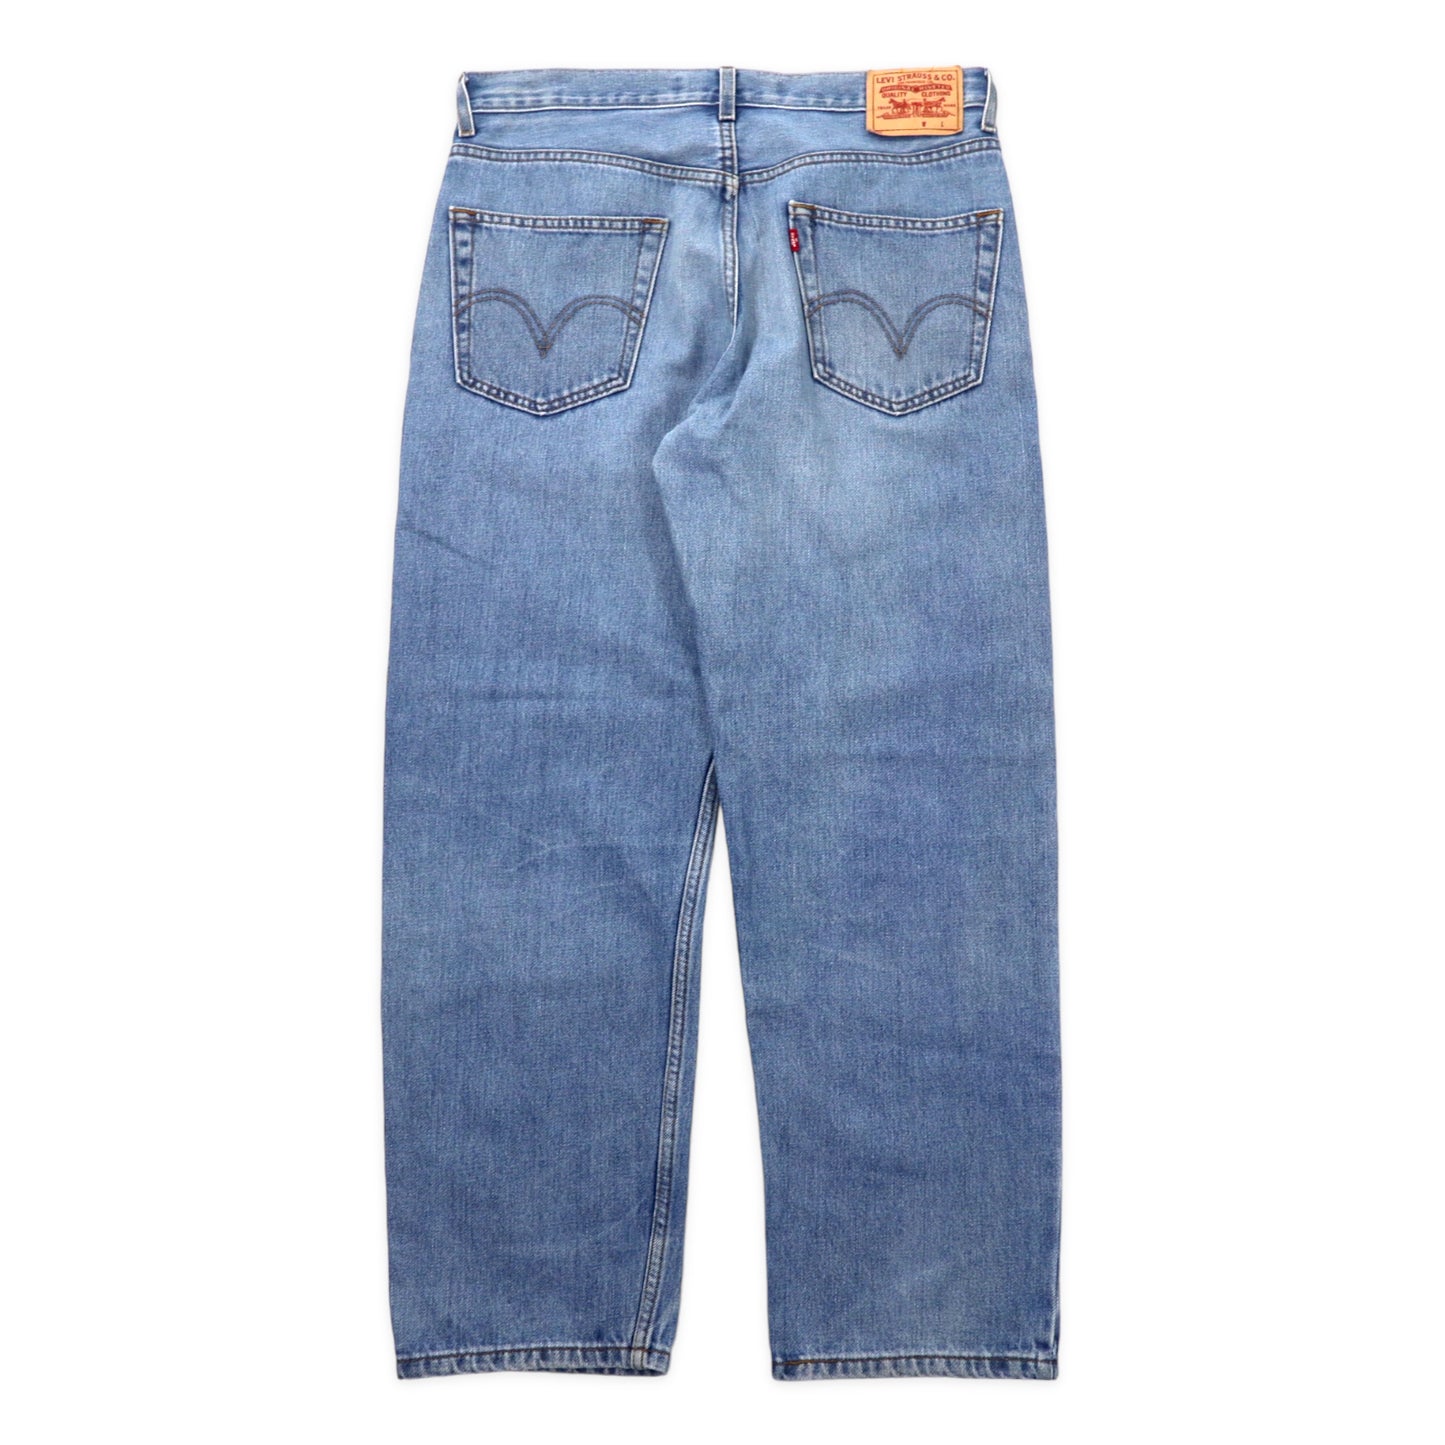 Levi's 00年代 505 RELAXED FIT COUPE RELAX デニムパンツ 34 ブルー 90CCCAN1